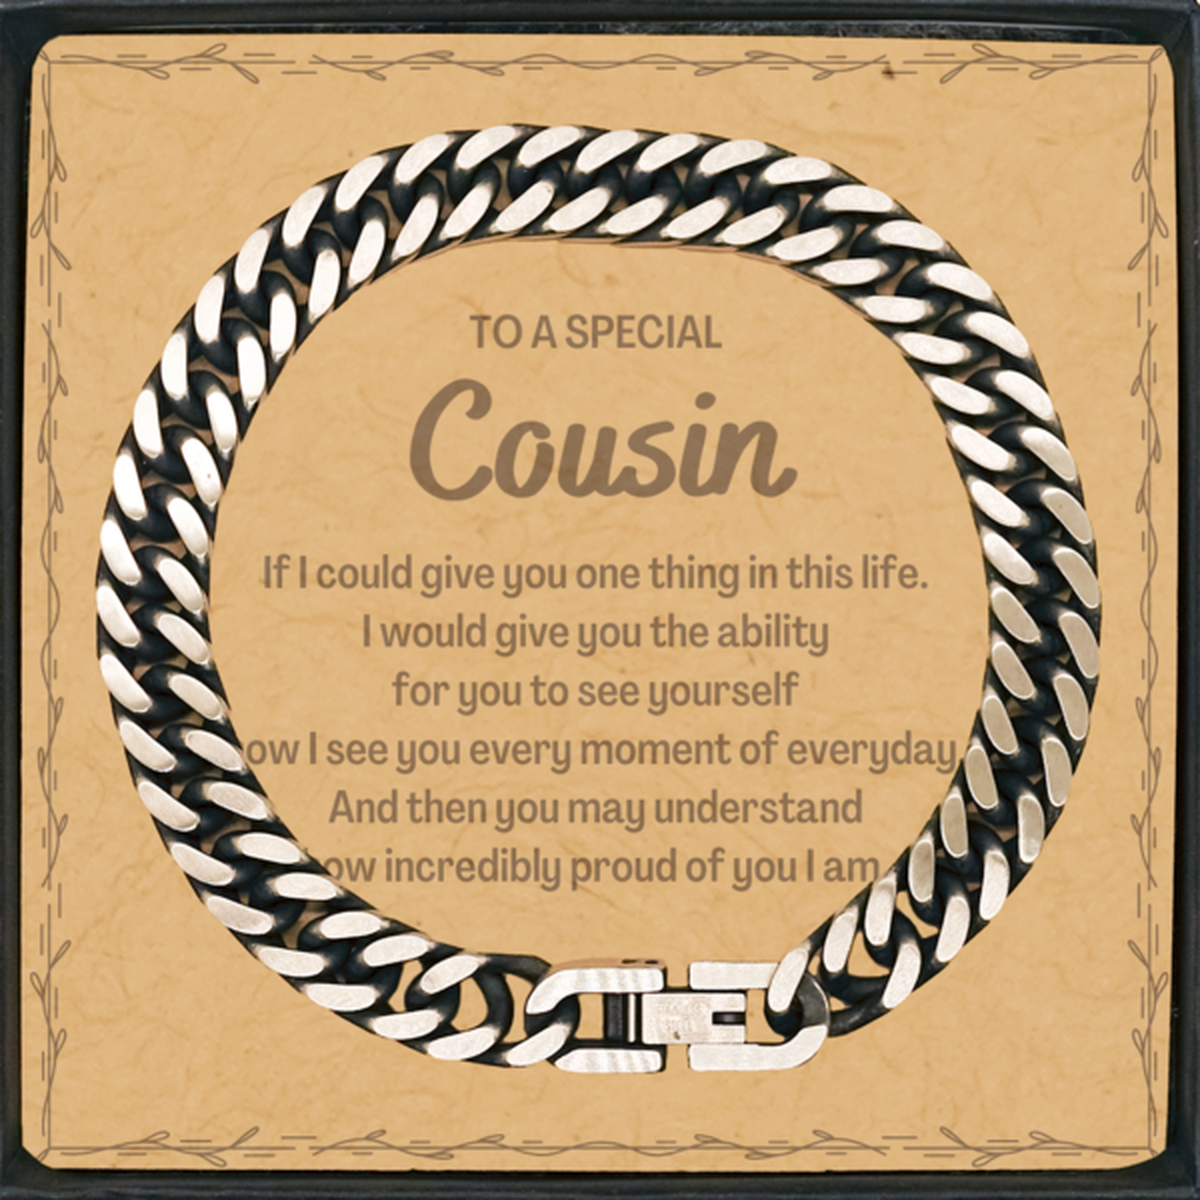 To My Cousin Cuban Link Chain Bracelet, Gifts For Cousin Message Card, Inspirational Gifts for Christmas Birthday, Epic Gifts for Cousin To A Special Cousin how incredibly proud of you I am